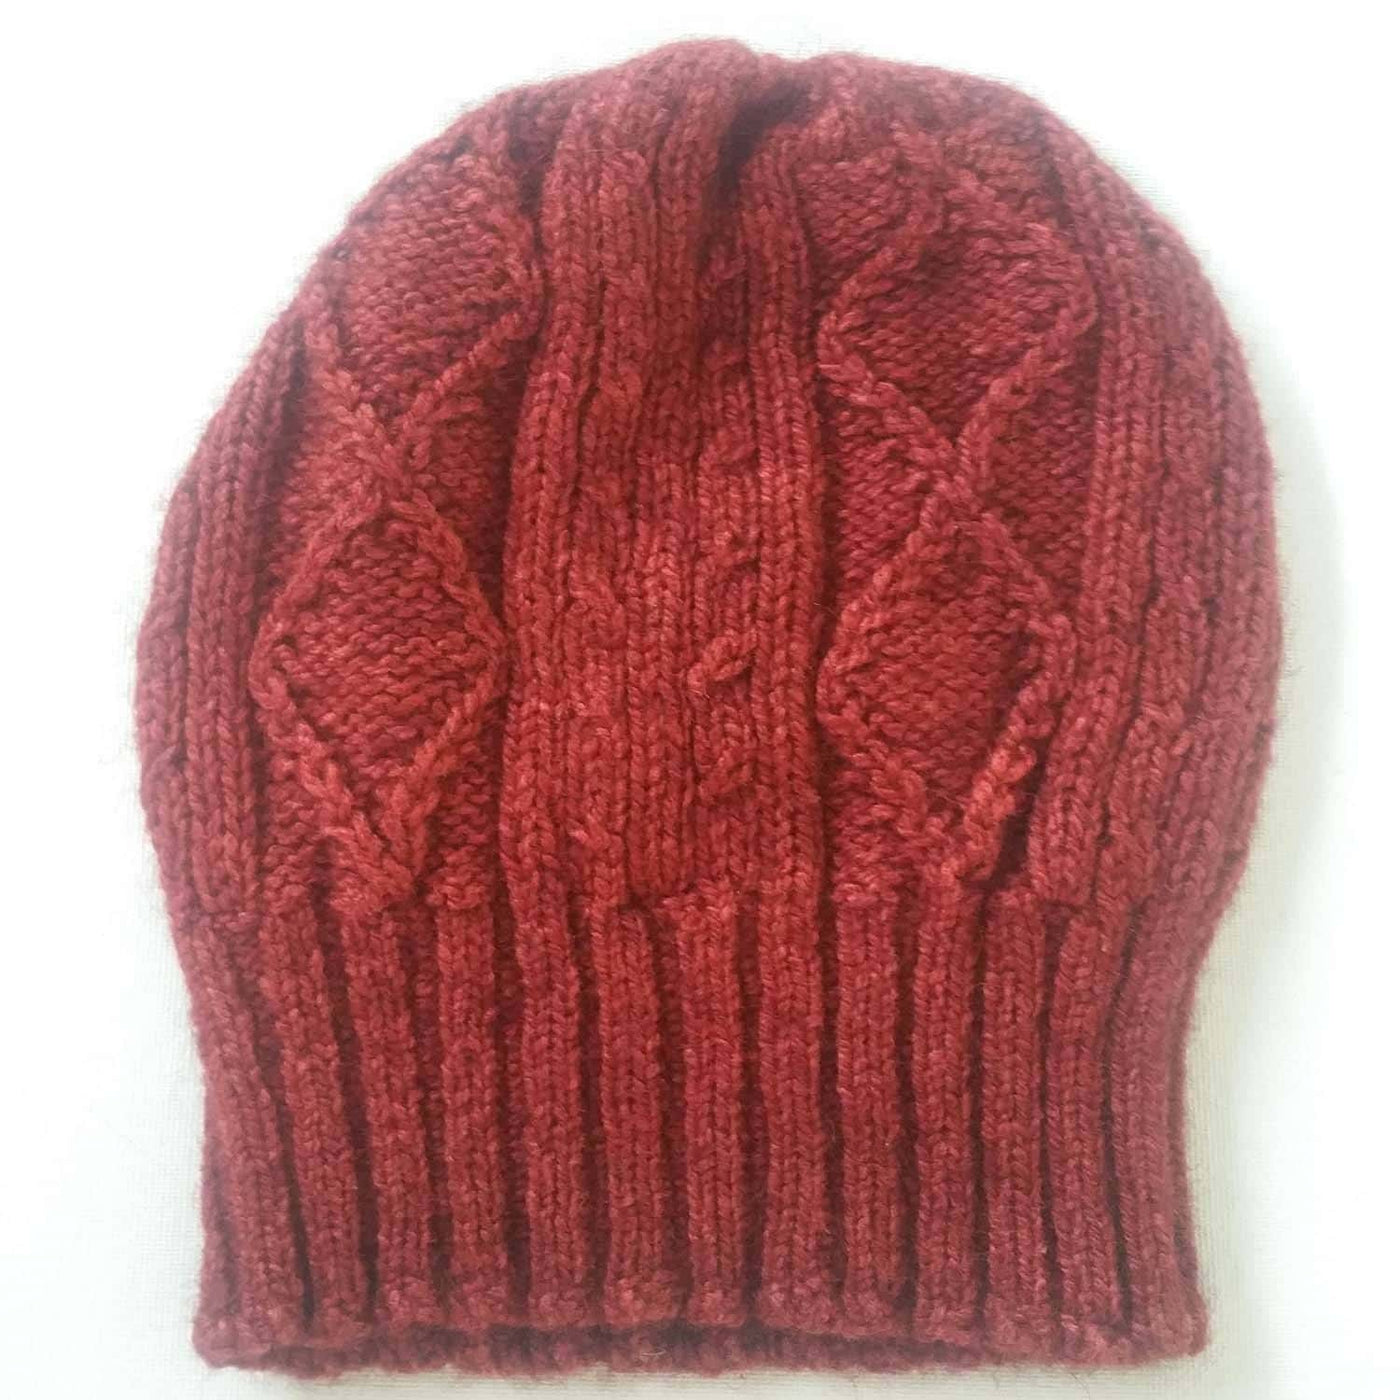 Diamond cabled knitted hat - Bison & Muga Silk Bison Gear The Buffalo Wool Co. Red 